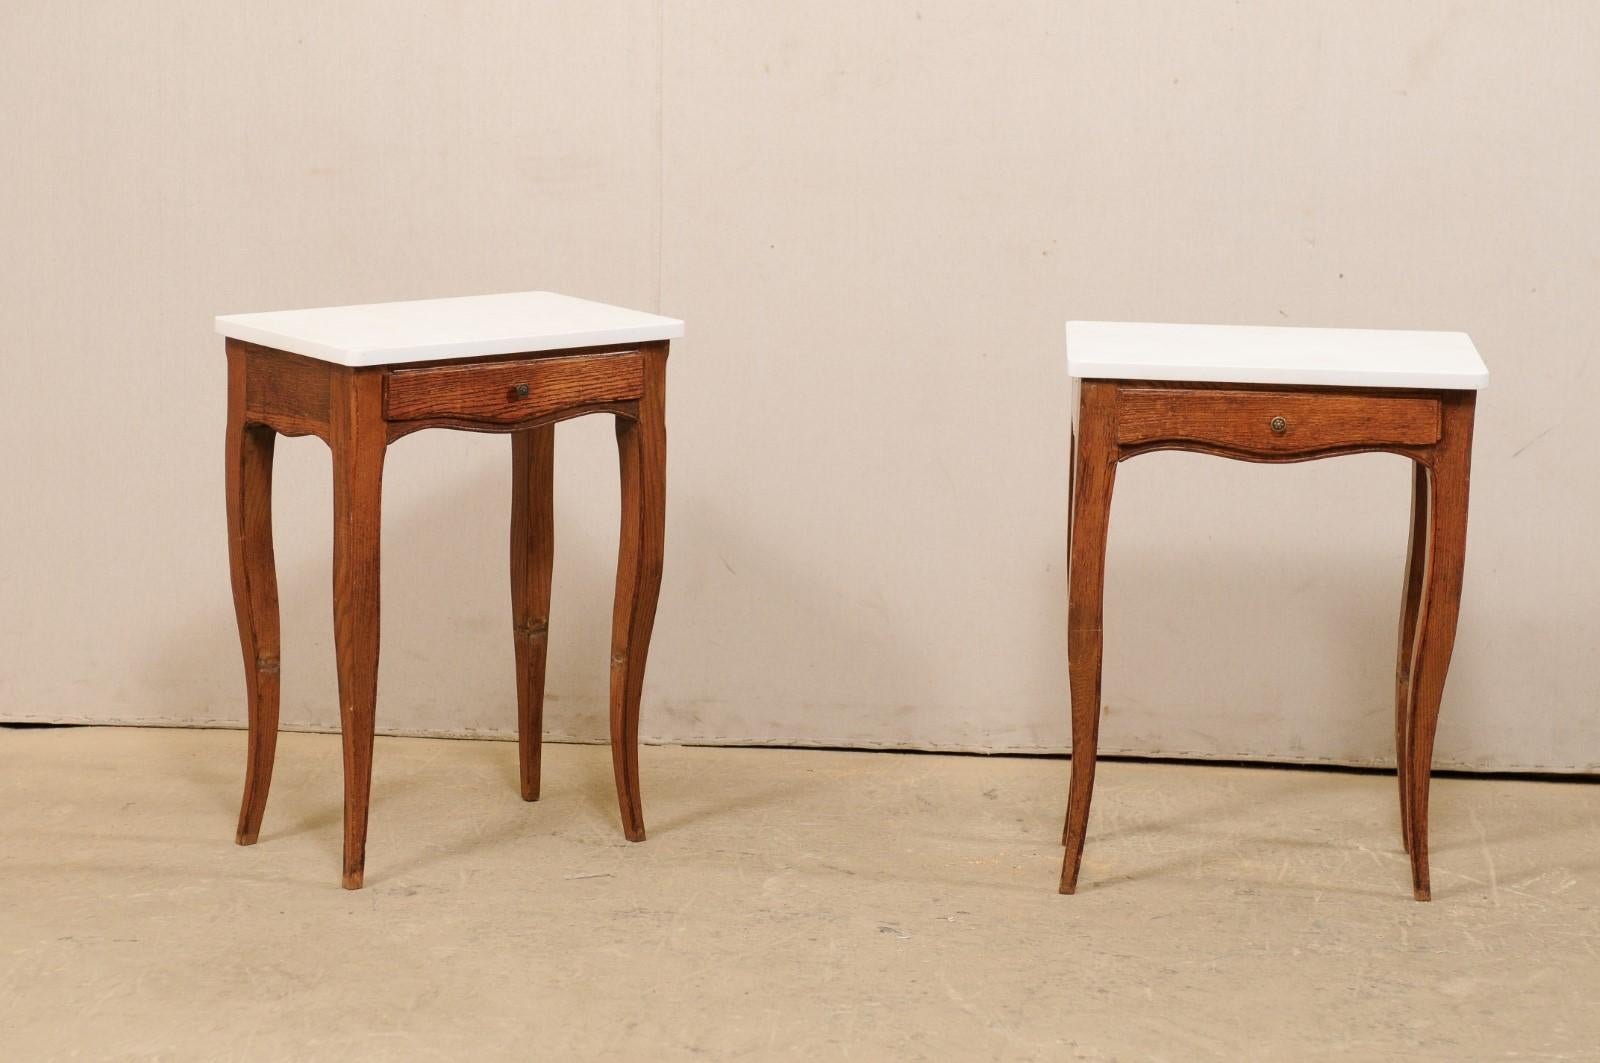 A French pair of side tables from the 1920s with new quartz stone tops. These antique tables from France each have a single drawer housed within the delicately scallop-carved skirt and are raised upon four gracefully curved legs which taper gently